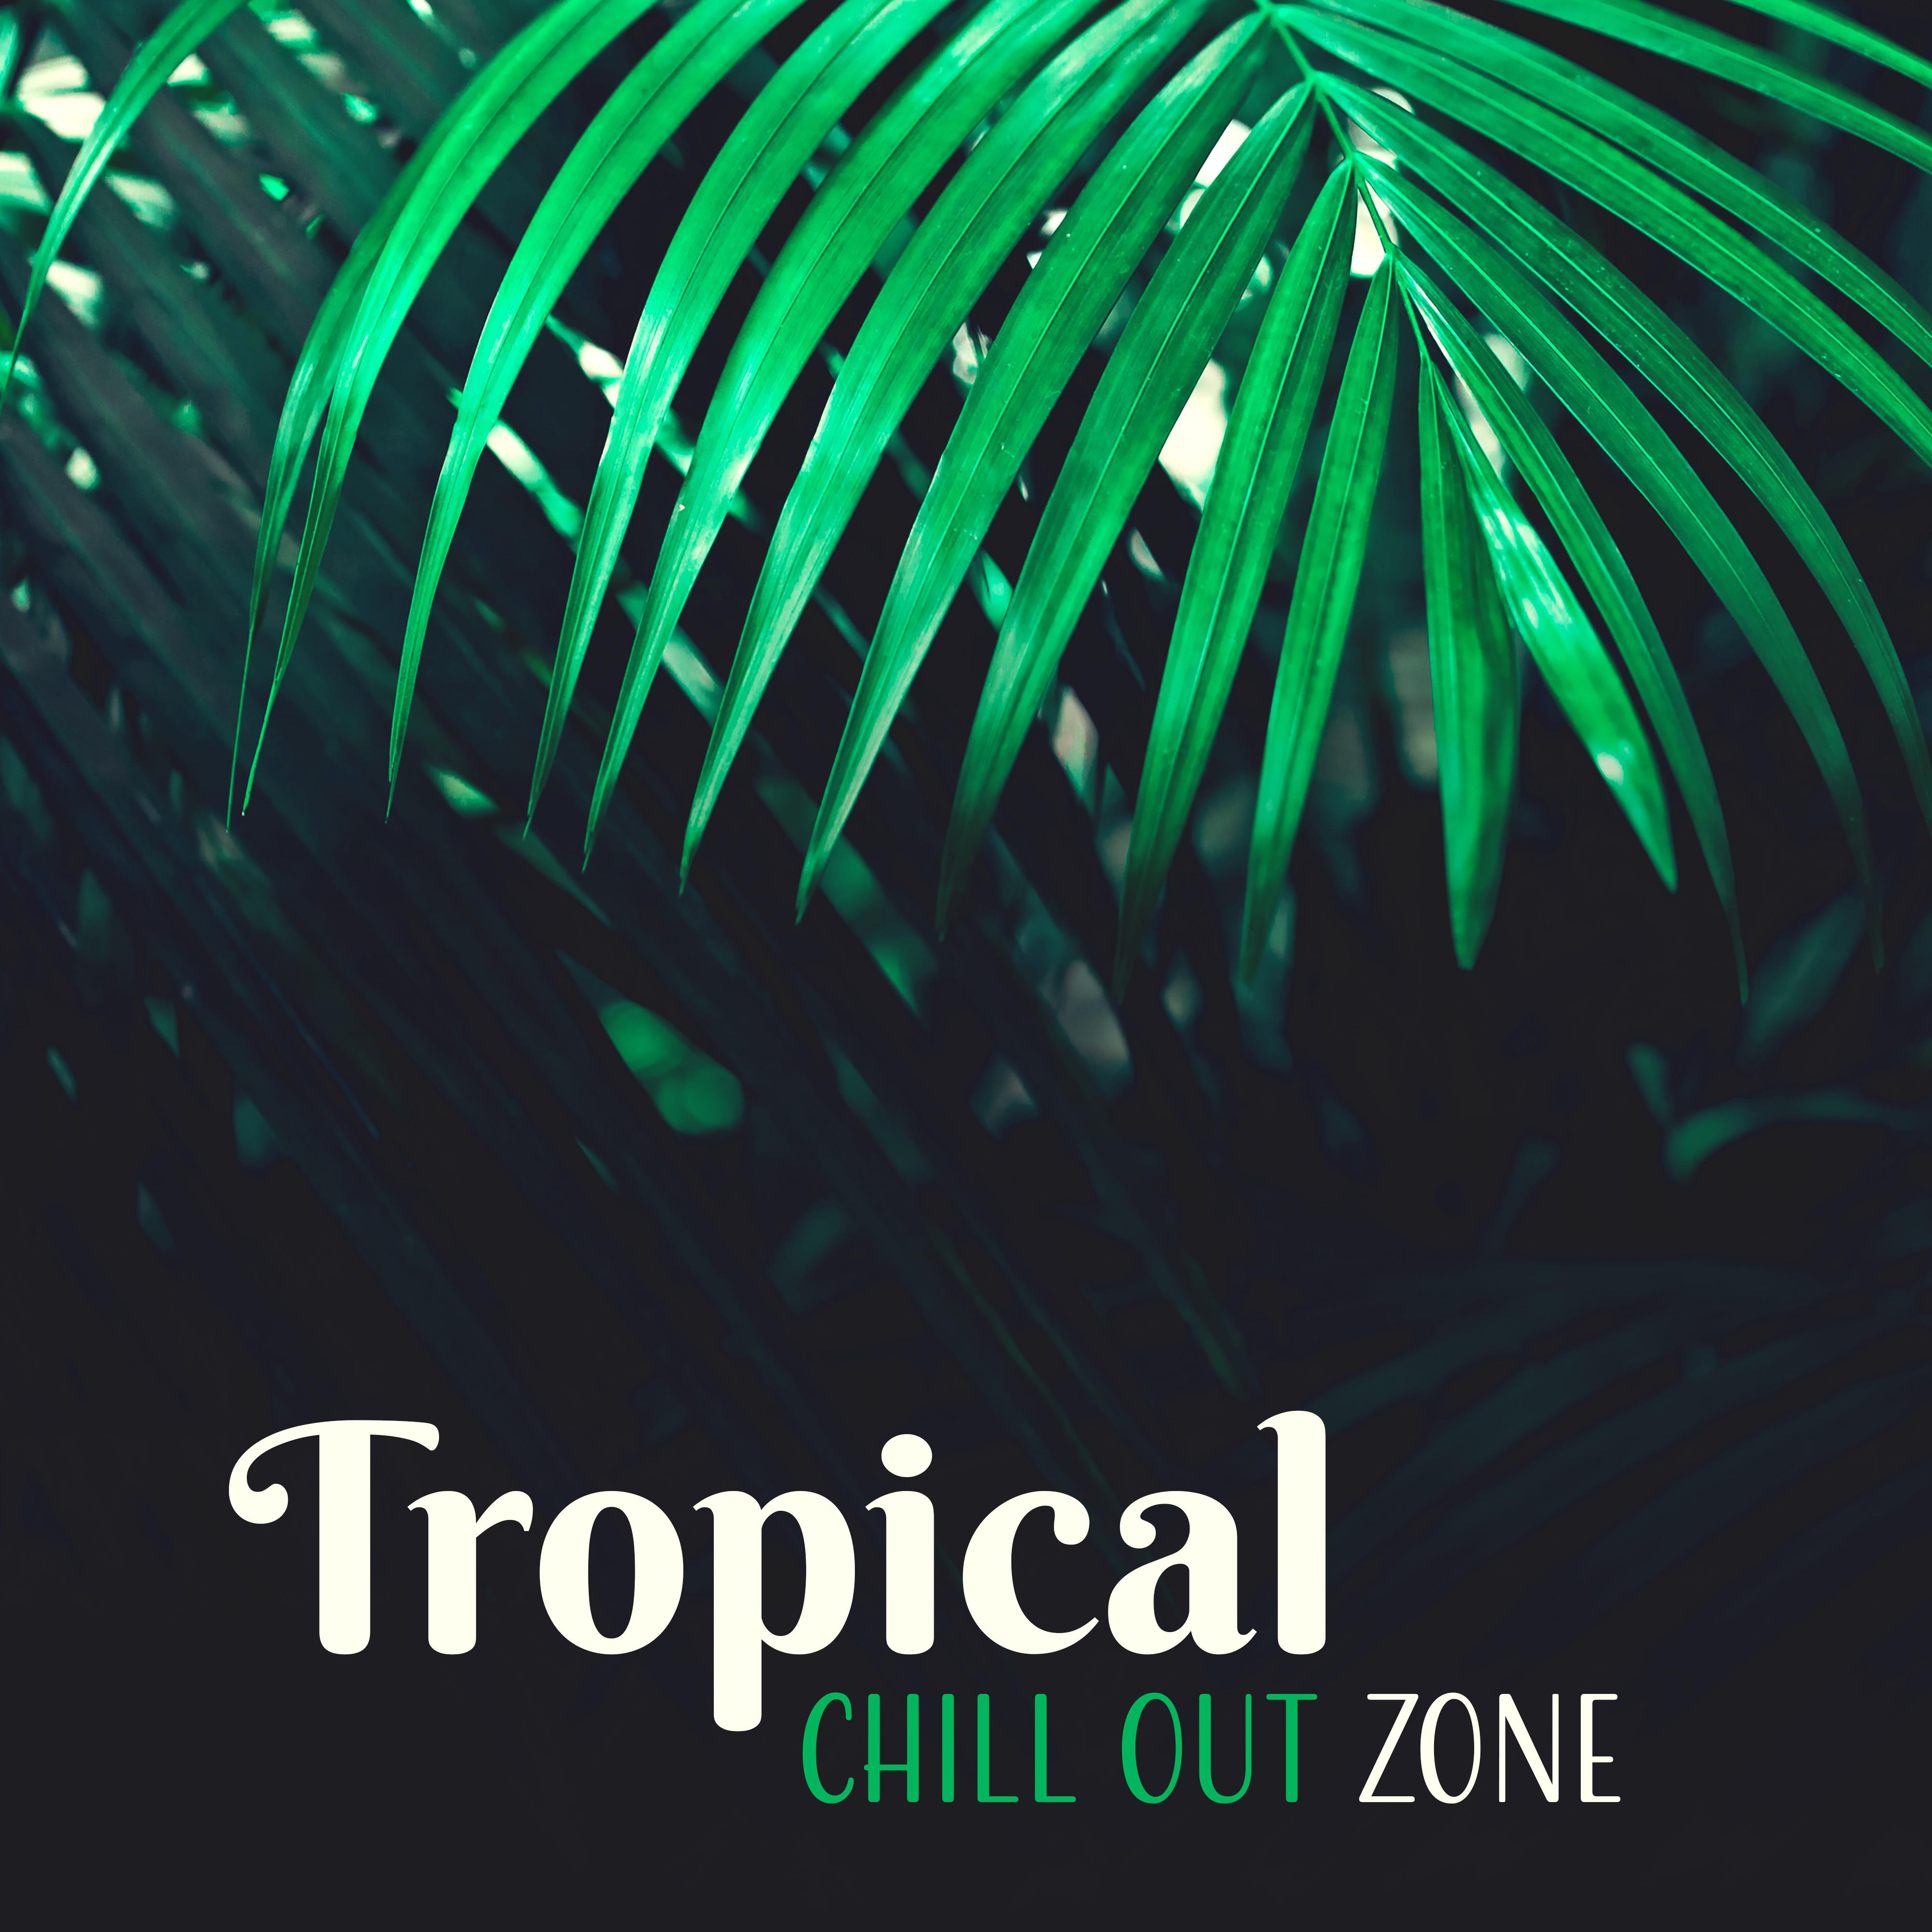 Tropical Chill Out Zone – Todays Chillout, Chill Out to Dance, Party Hits 2017, Relax, Exotic Beach